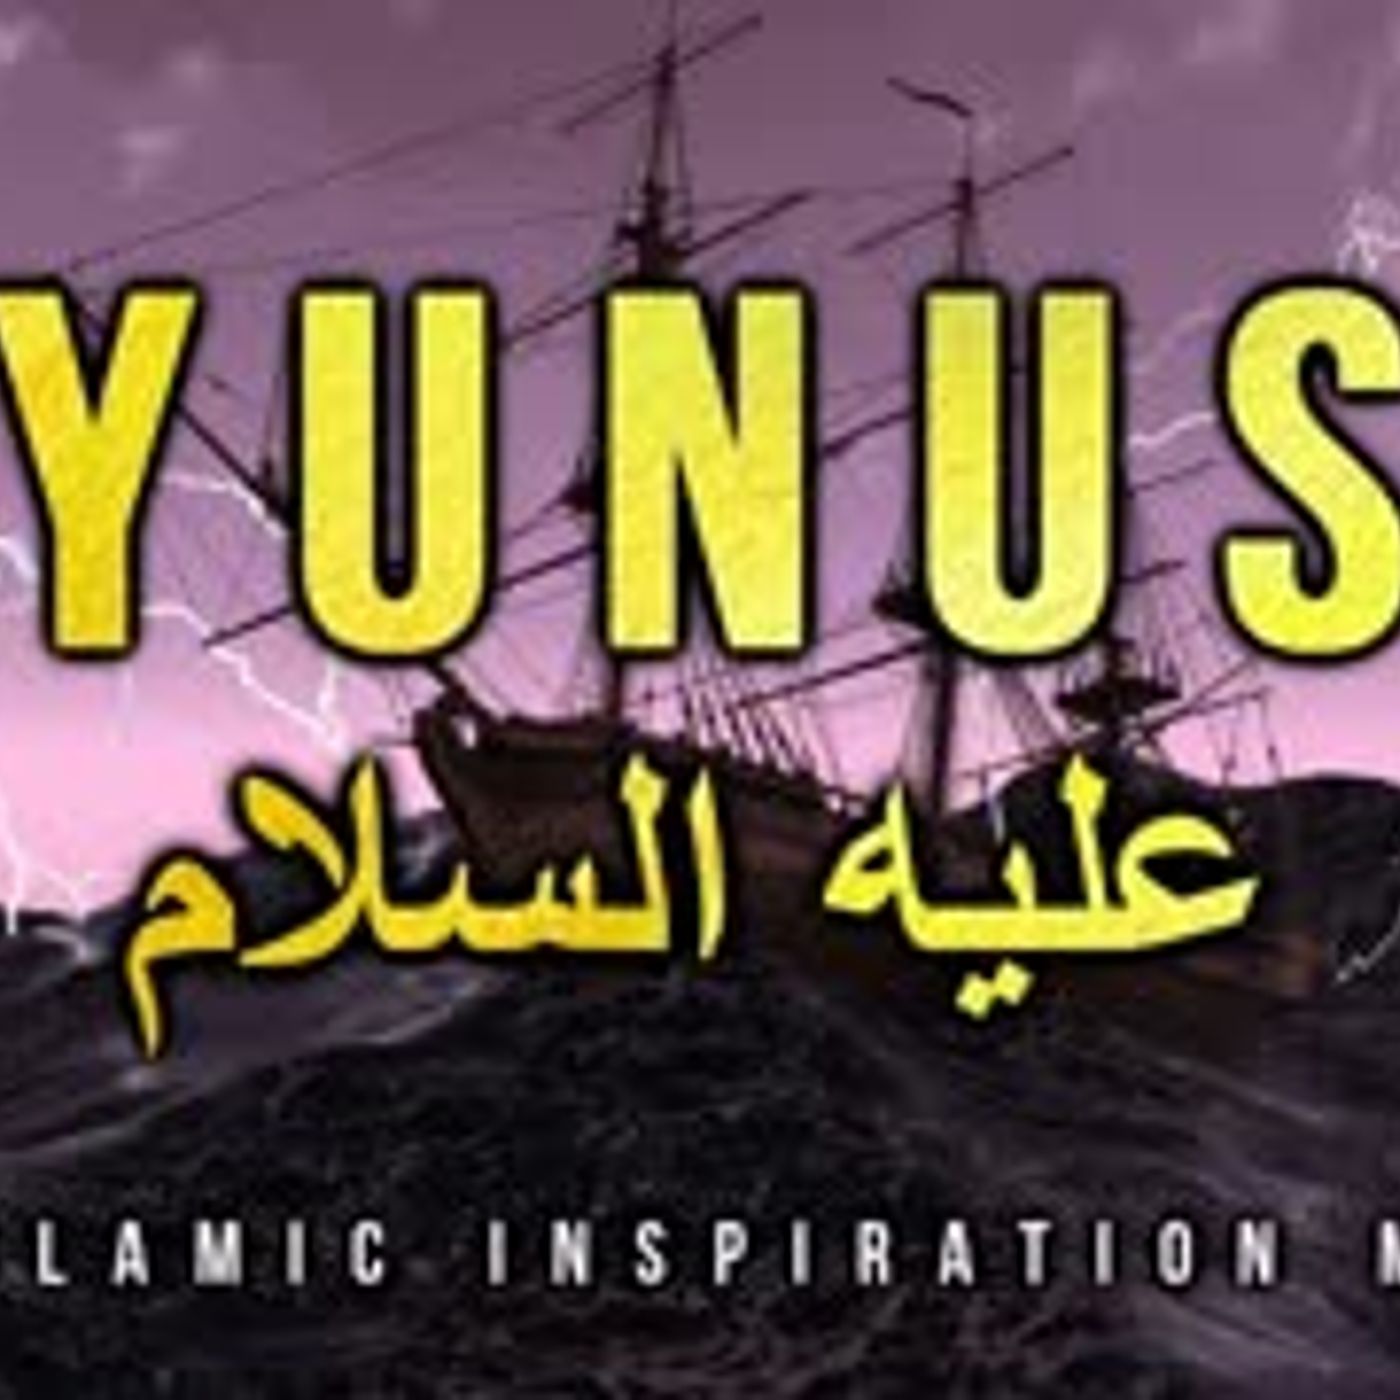 [BE024] Yunus AS - The Companion Of The Fish